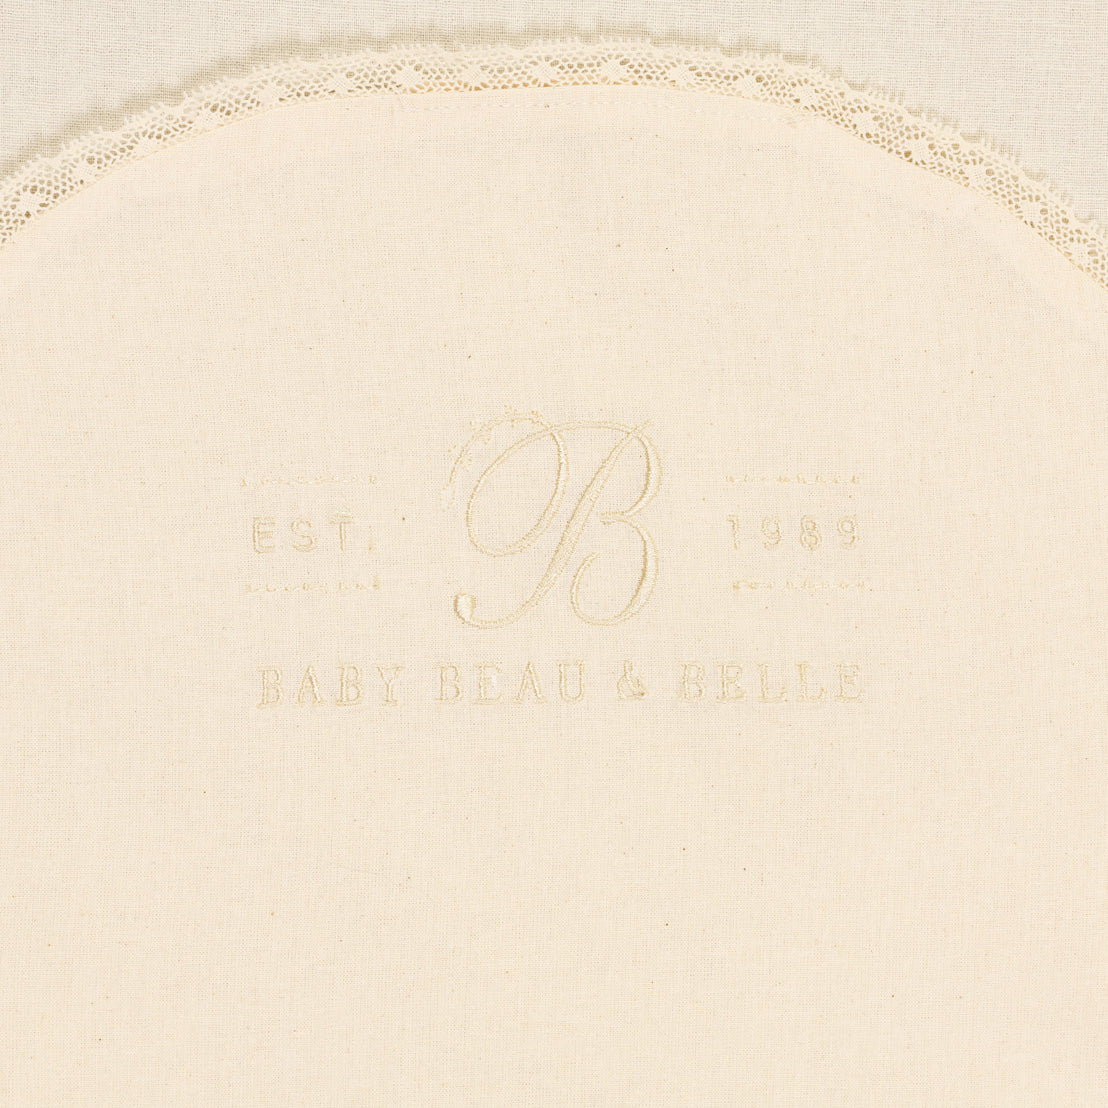 Close-up of an heirloom embroidered logo that reads "est. b 1989," with "baby beau & belle" below in faint stitching on ivory fabric with christening lace trim at the top Muslin Keepsake Garment Bag